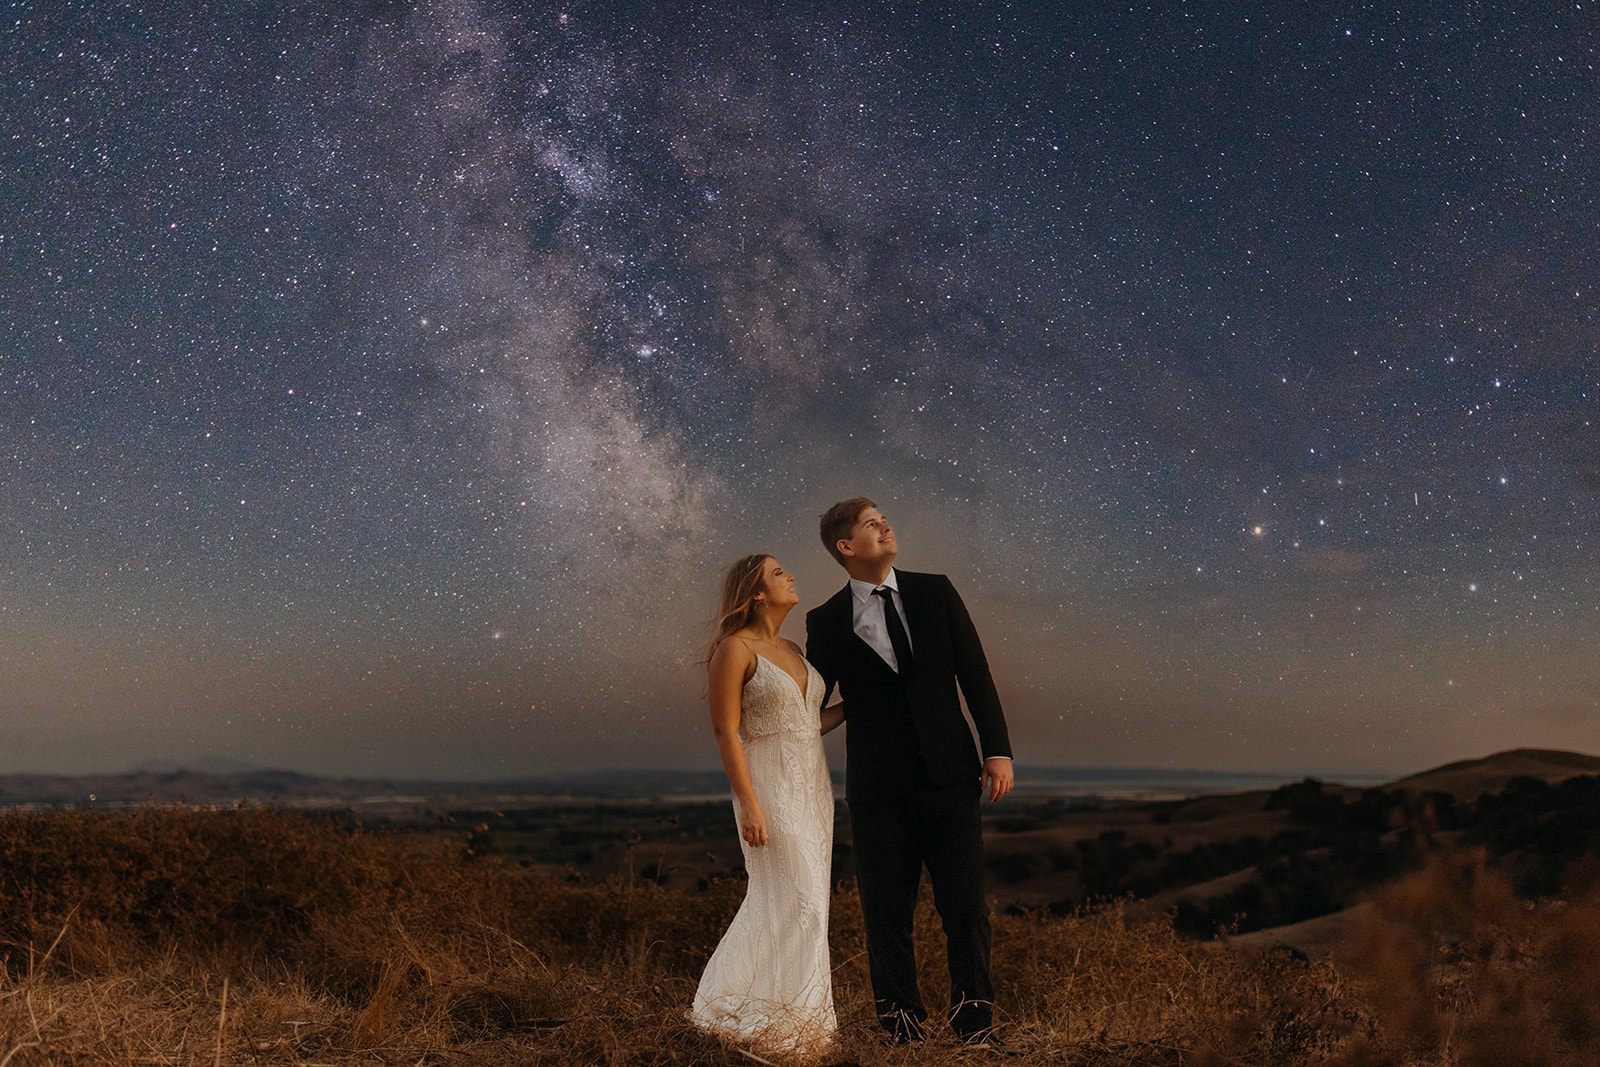 A couple admires the night sky.